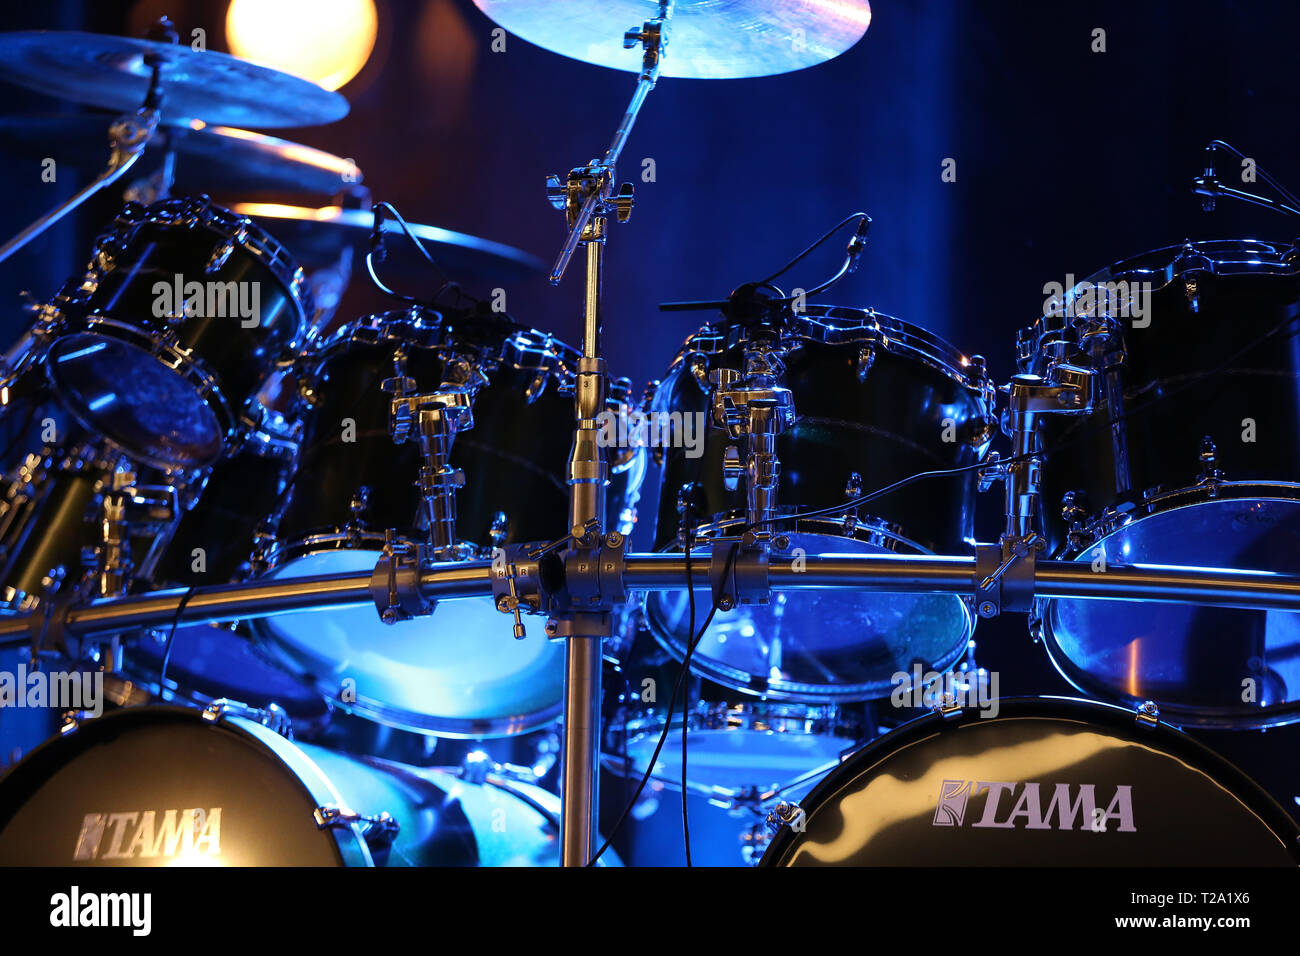 CRACOW, POLAND - MARCH 16, 2016: Drums of   Billy Cobham live on stage in ICE Cracow, Poland Stock Photo